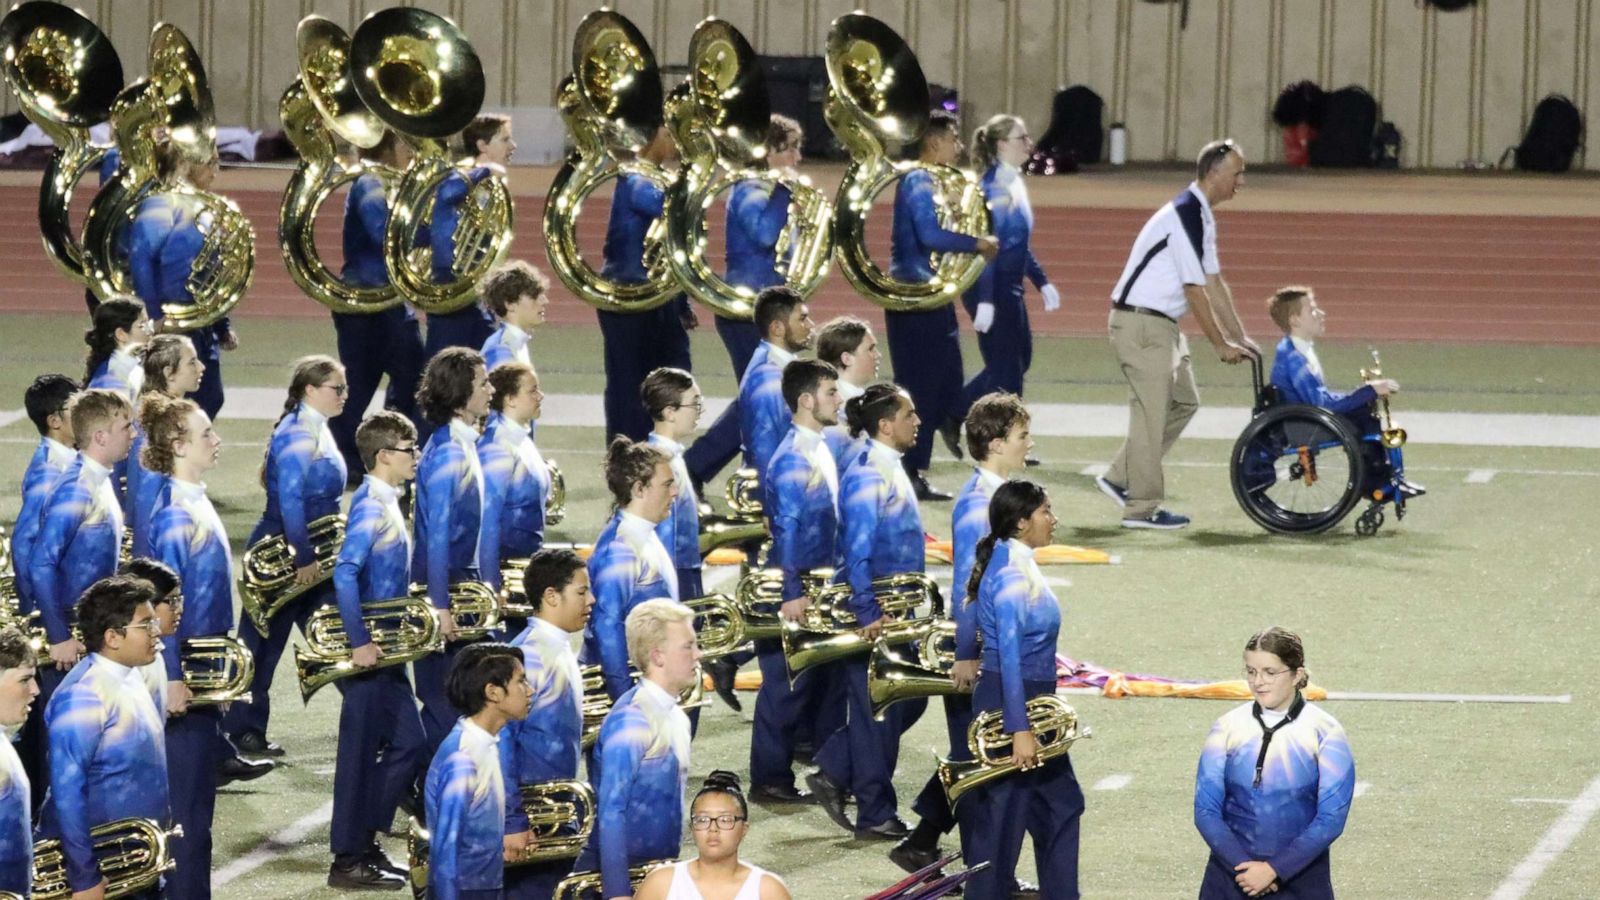 Dunbar High School band director brings show style marching to